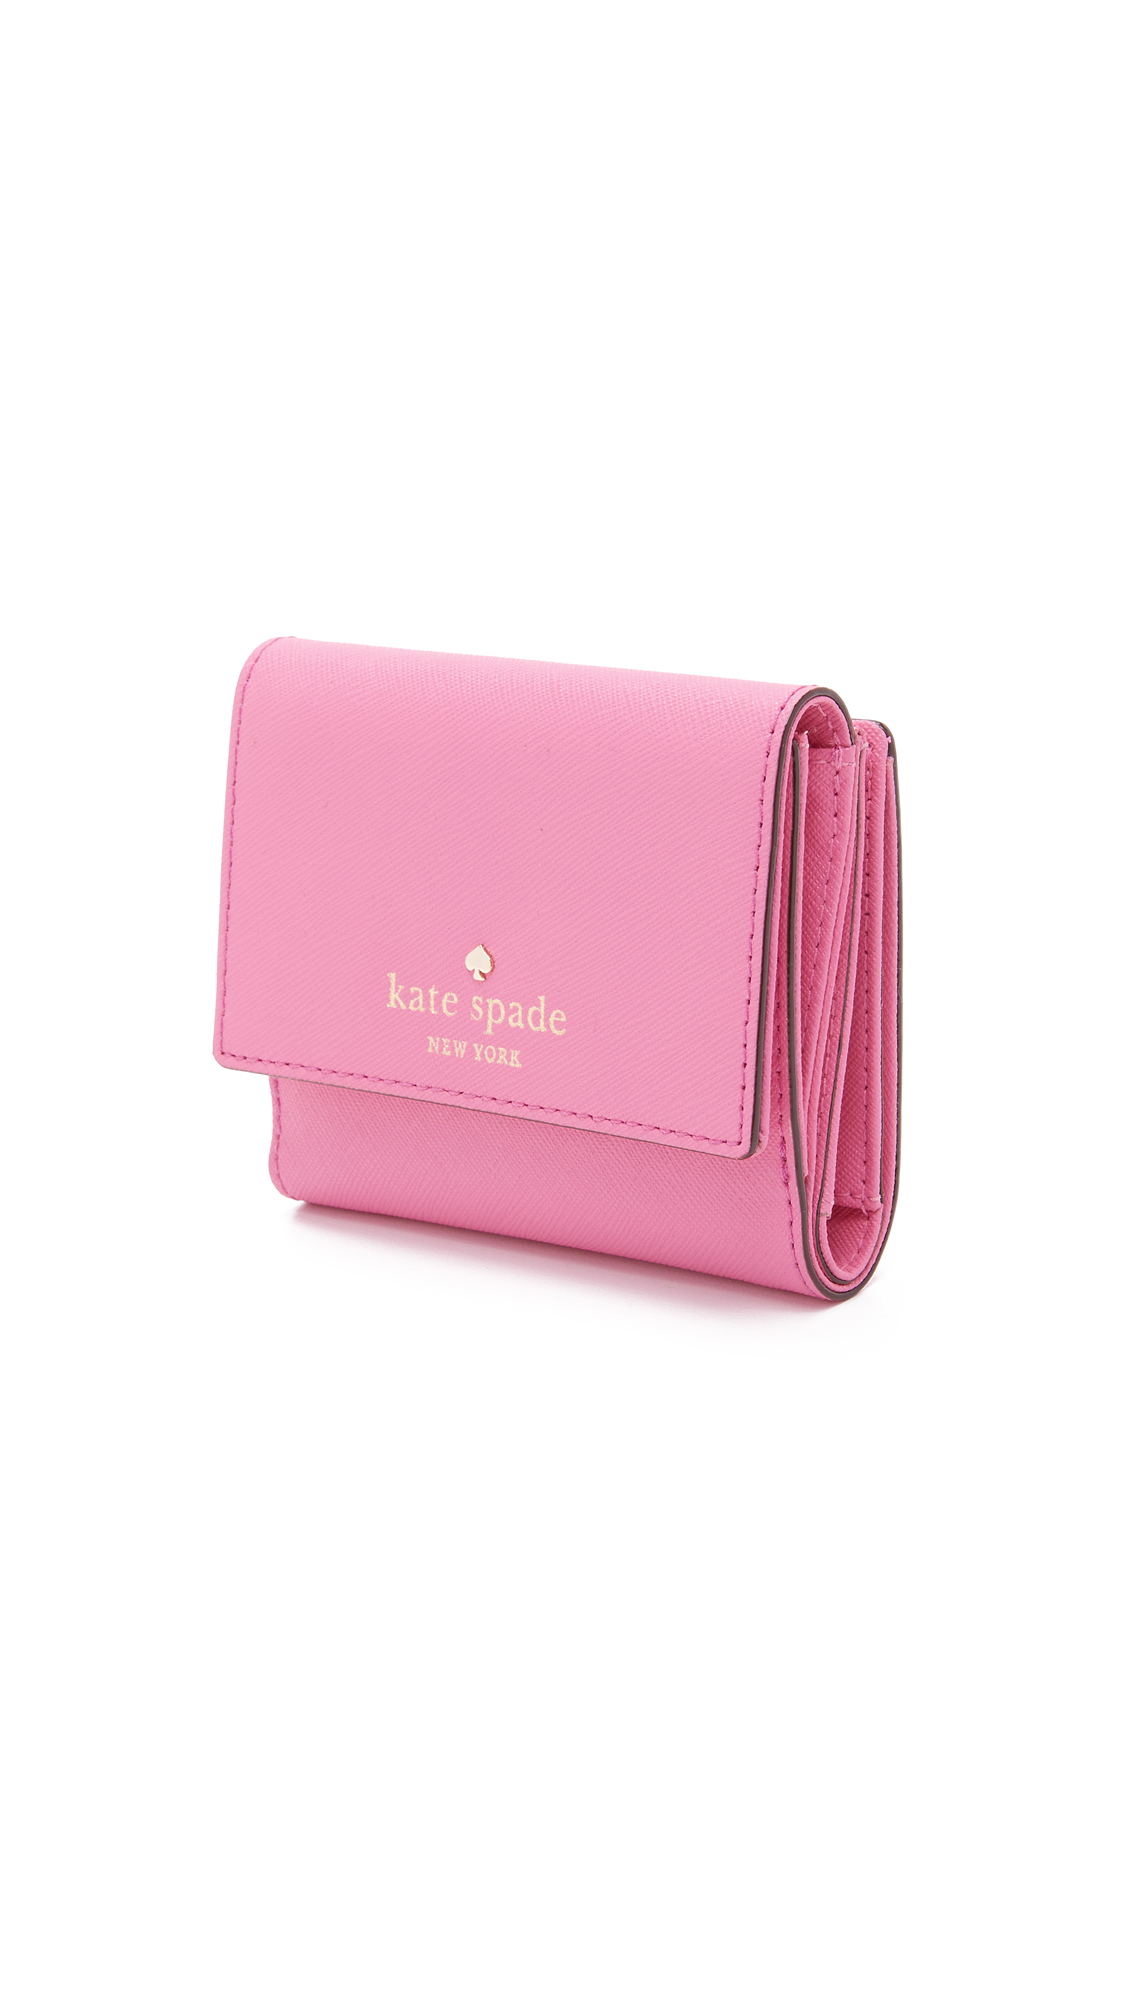 Kate Spade Tavy Small Wallet in Pink - Lyst